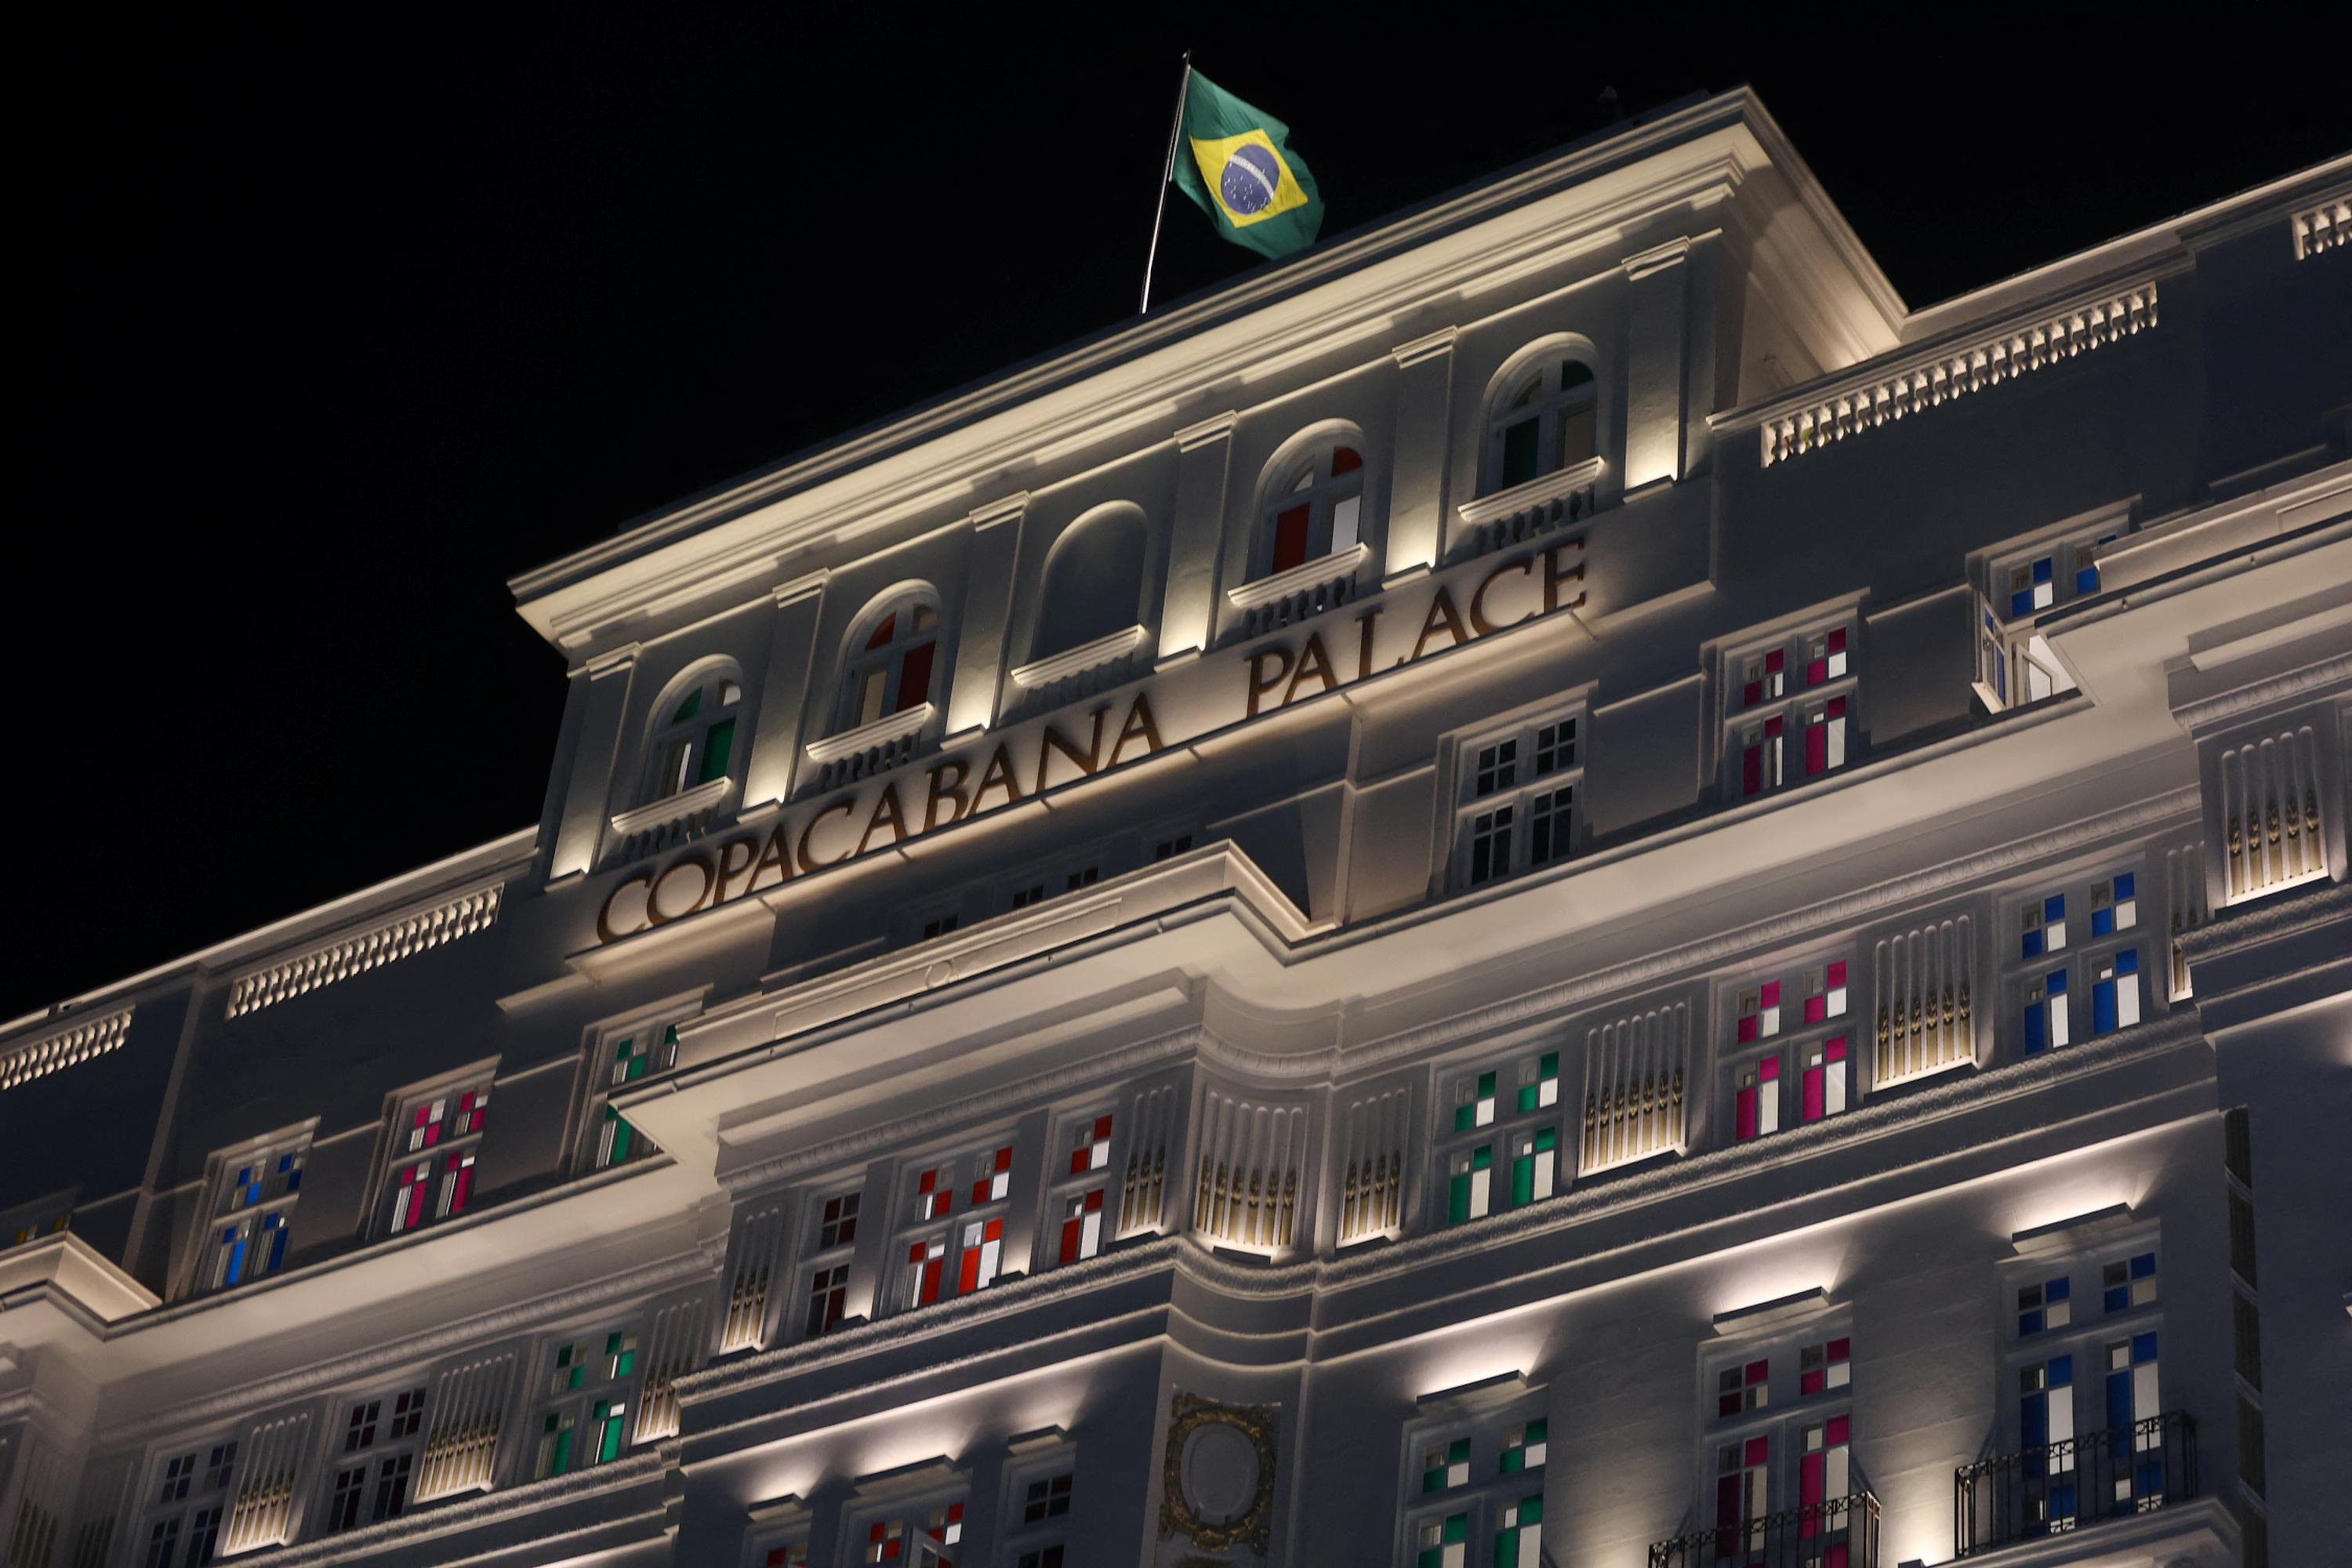 Daniel Buren offers a new face to the iconic Copacabana Palace